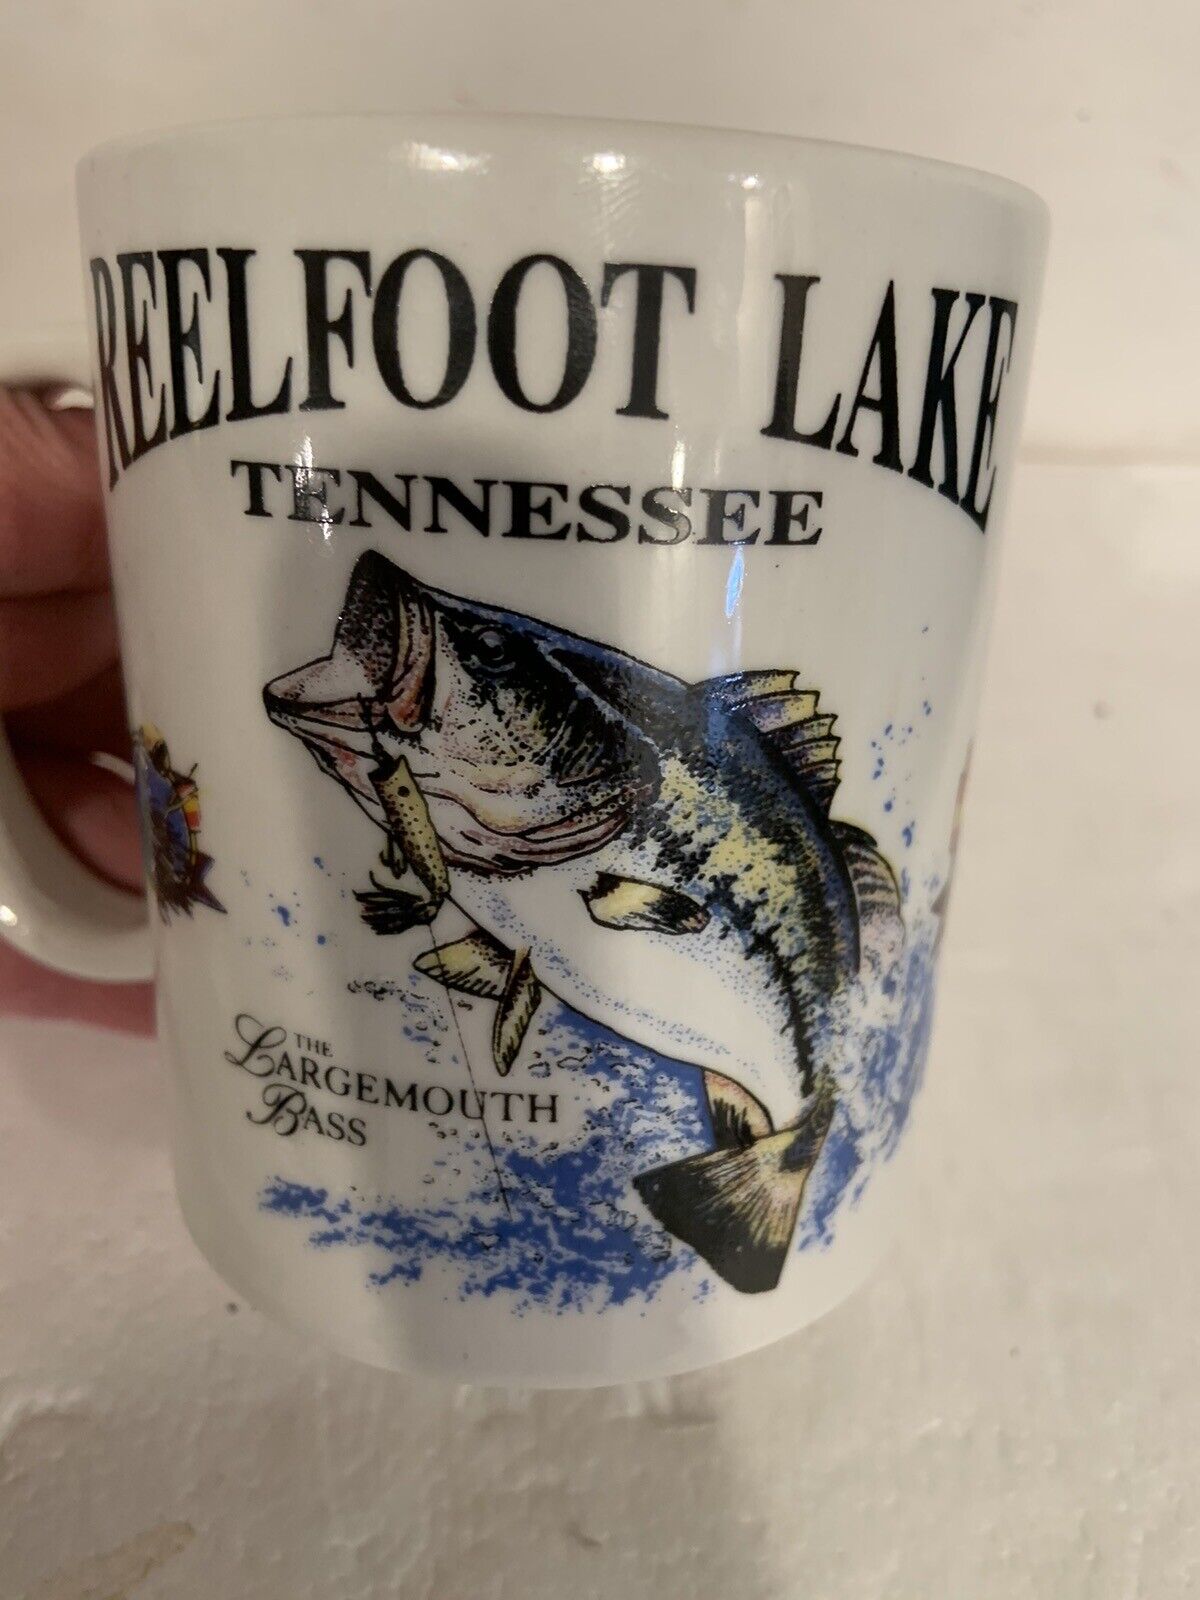 Vntg Reelfoot Lake Tennessee Coffee Mug Large Mouth Bass Double Sided Rare NICE